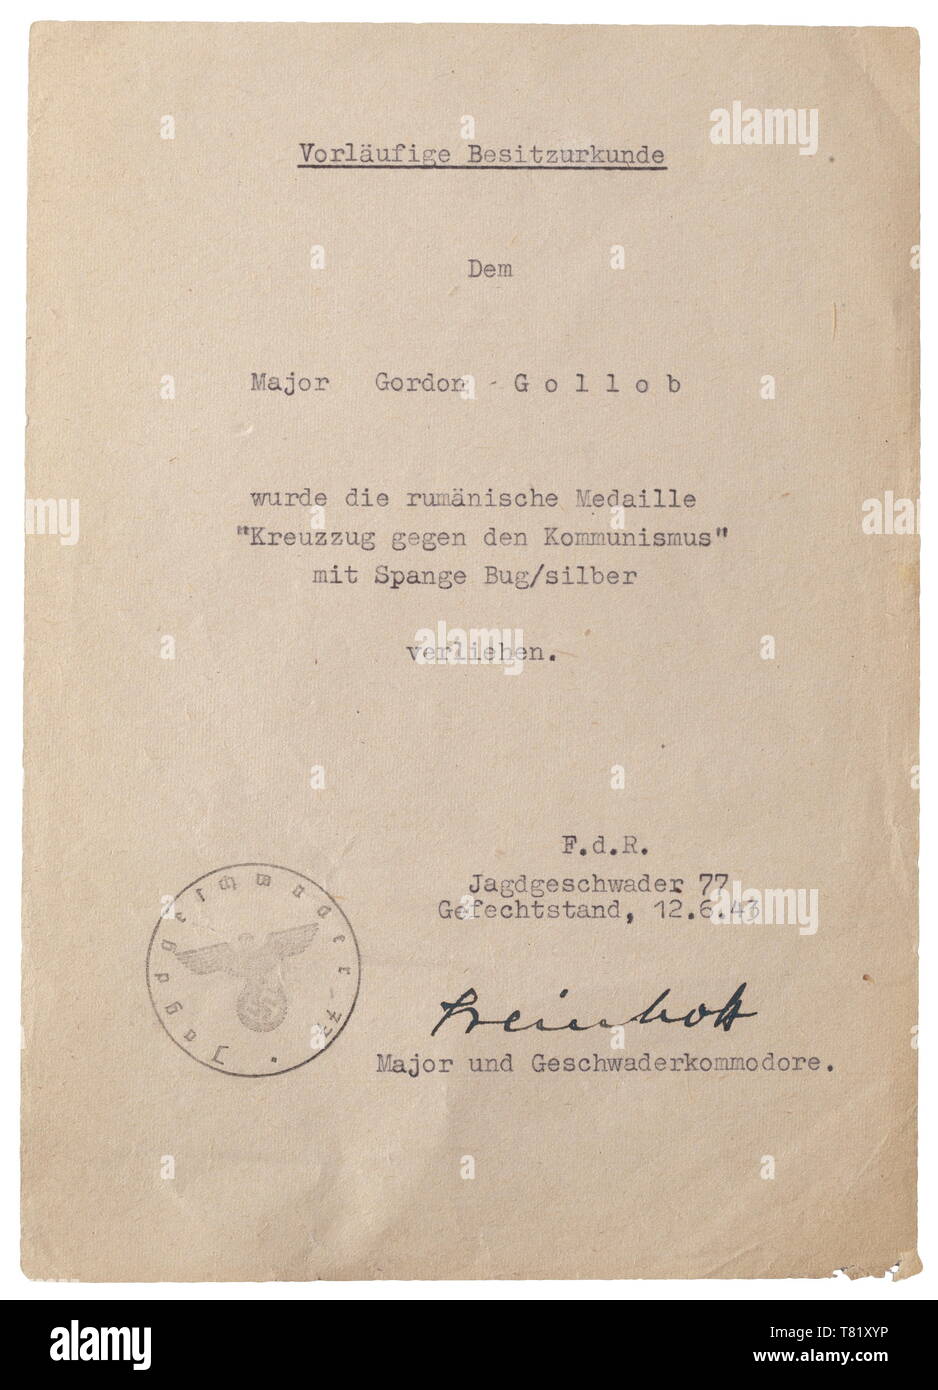 A typewritten preliminary possession document for the (tr) 'Rumanian Medal for the Crusade Against Communism with Bug Clasp/Silver', issued by Fighter Wing 77 on 12 June 1943 to Major Gordon Gollob, with original signature of Major and Wing Commander Johannes Steinhoff. historic, historical, Air Force, branch of service, branches of service, armed service, armed services, military, militaria, air forces, object, objects, stills, clipping, clippings, cut out, cut-out, cut-outs, 20th century, Editorial-Use-Only Stock Photo